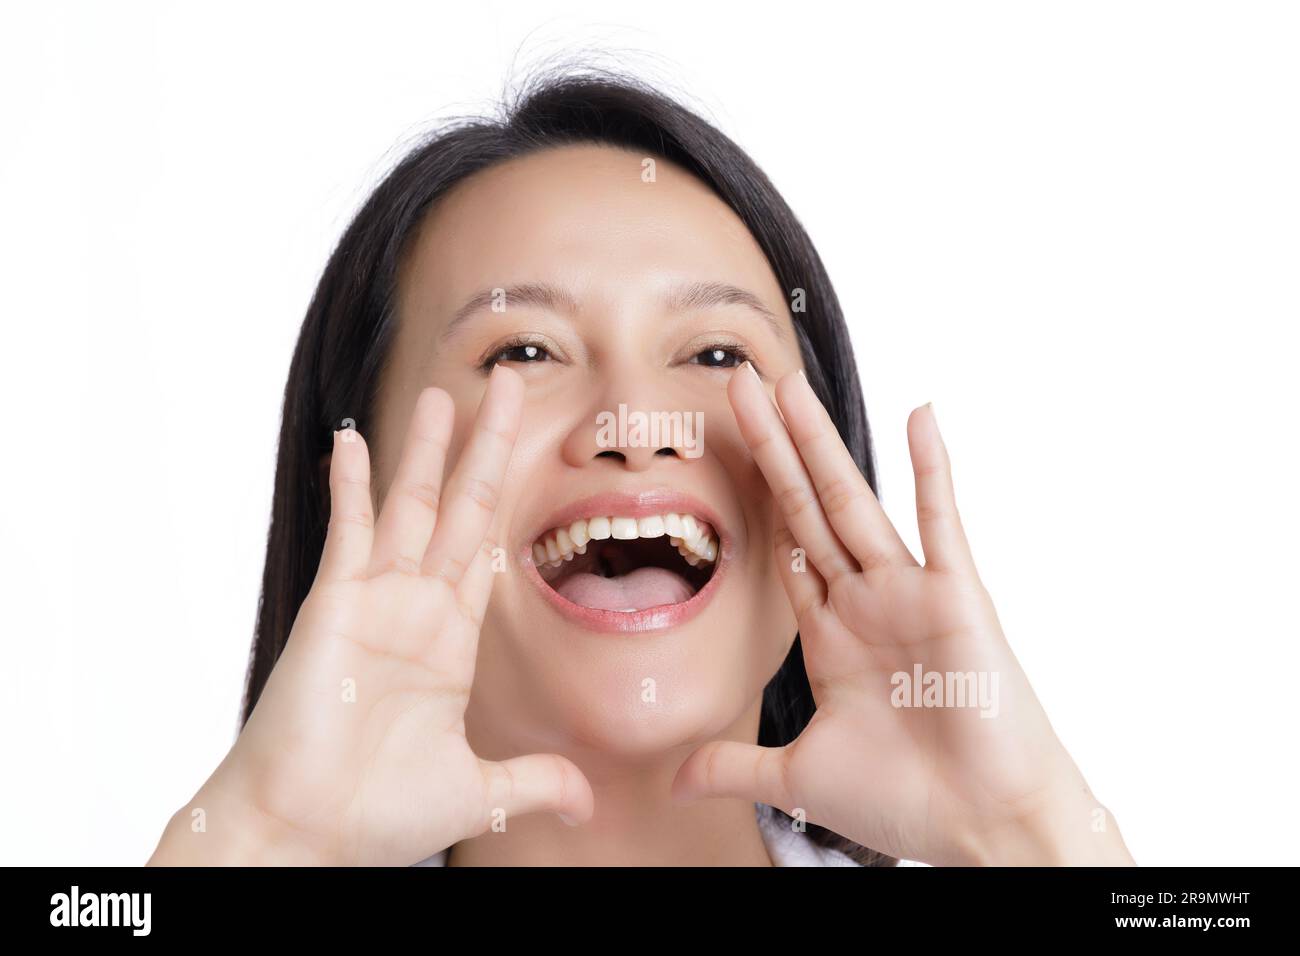 Asian American shouting for joy isolated on a white background with copy space Stock Photo